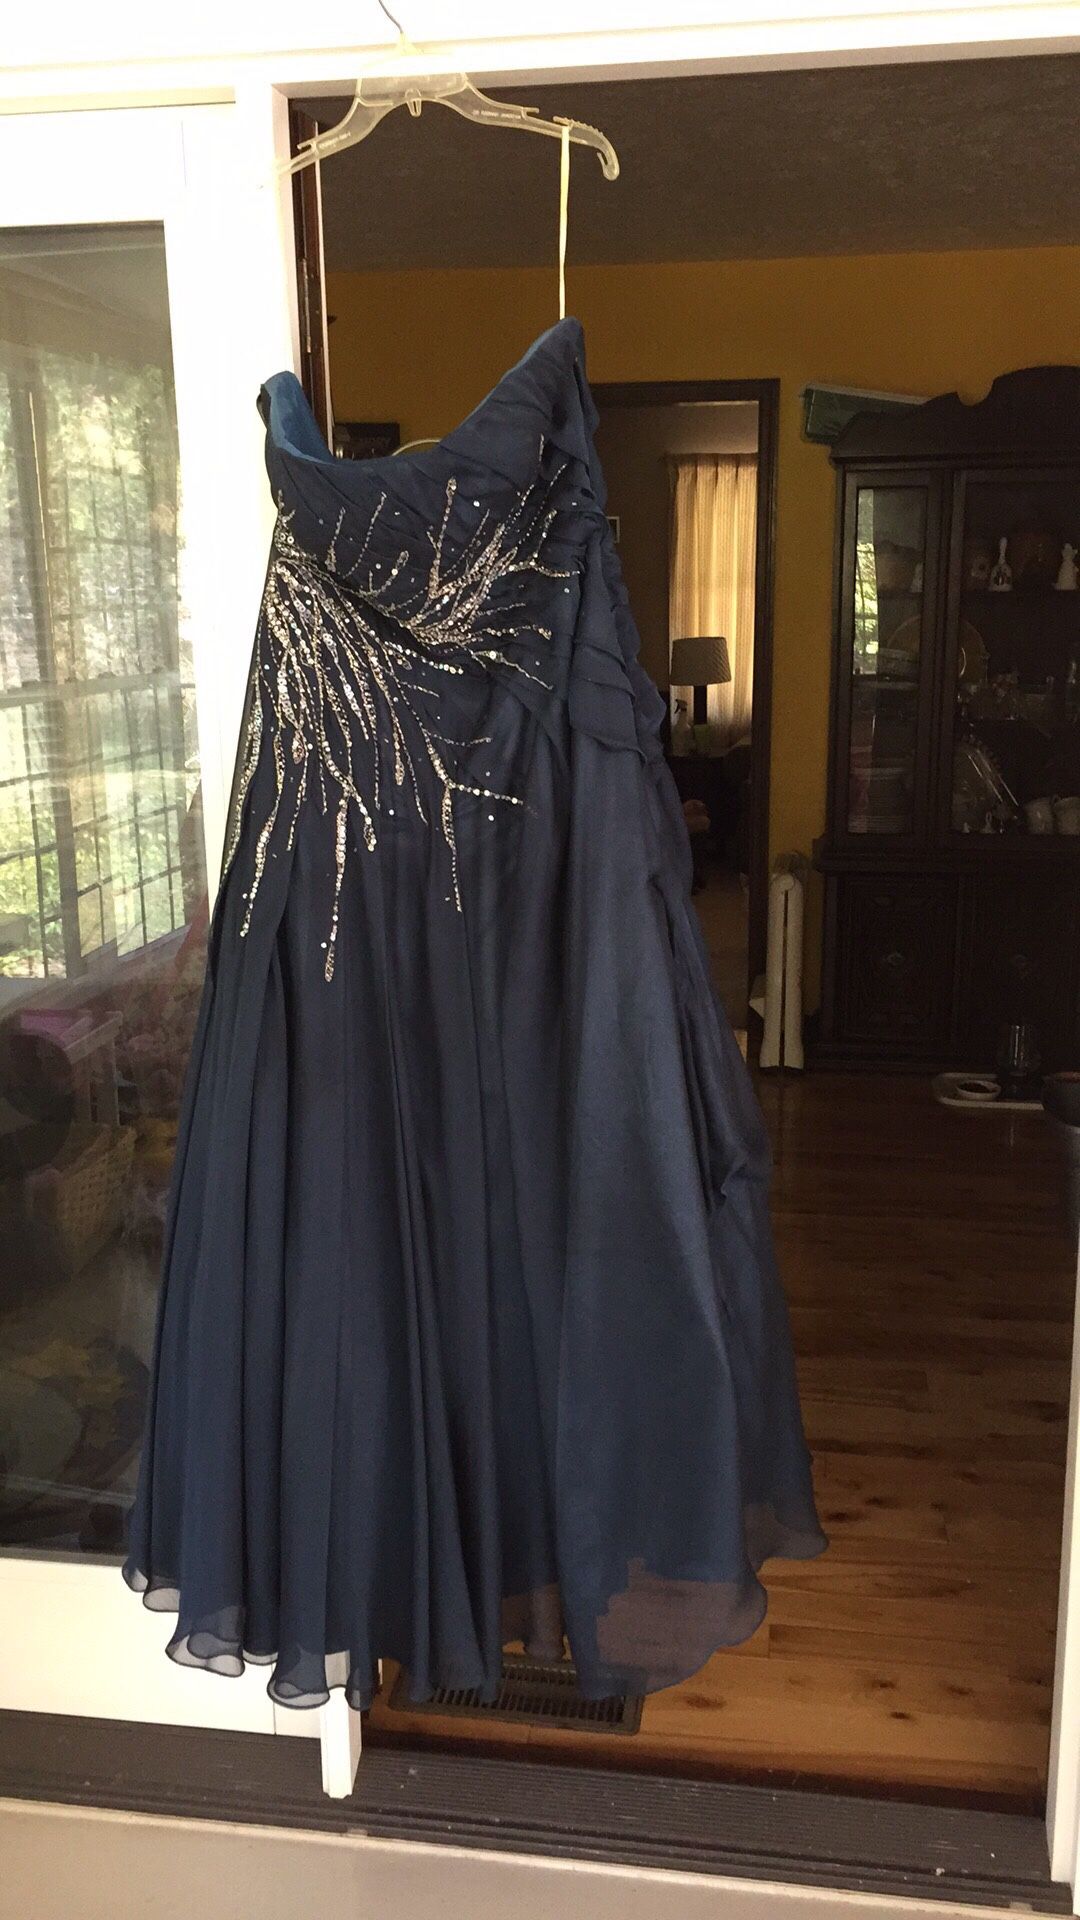 Joli Pro Size 16/18 Prom/Special Event Dress/Gown